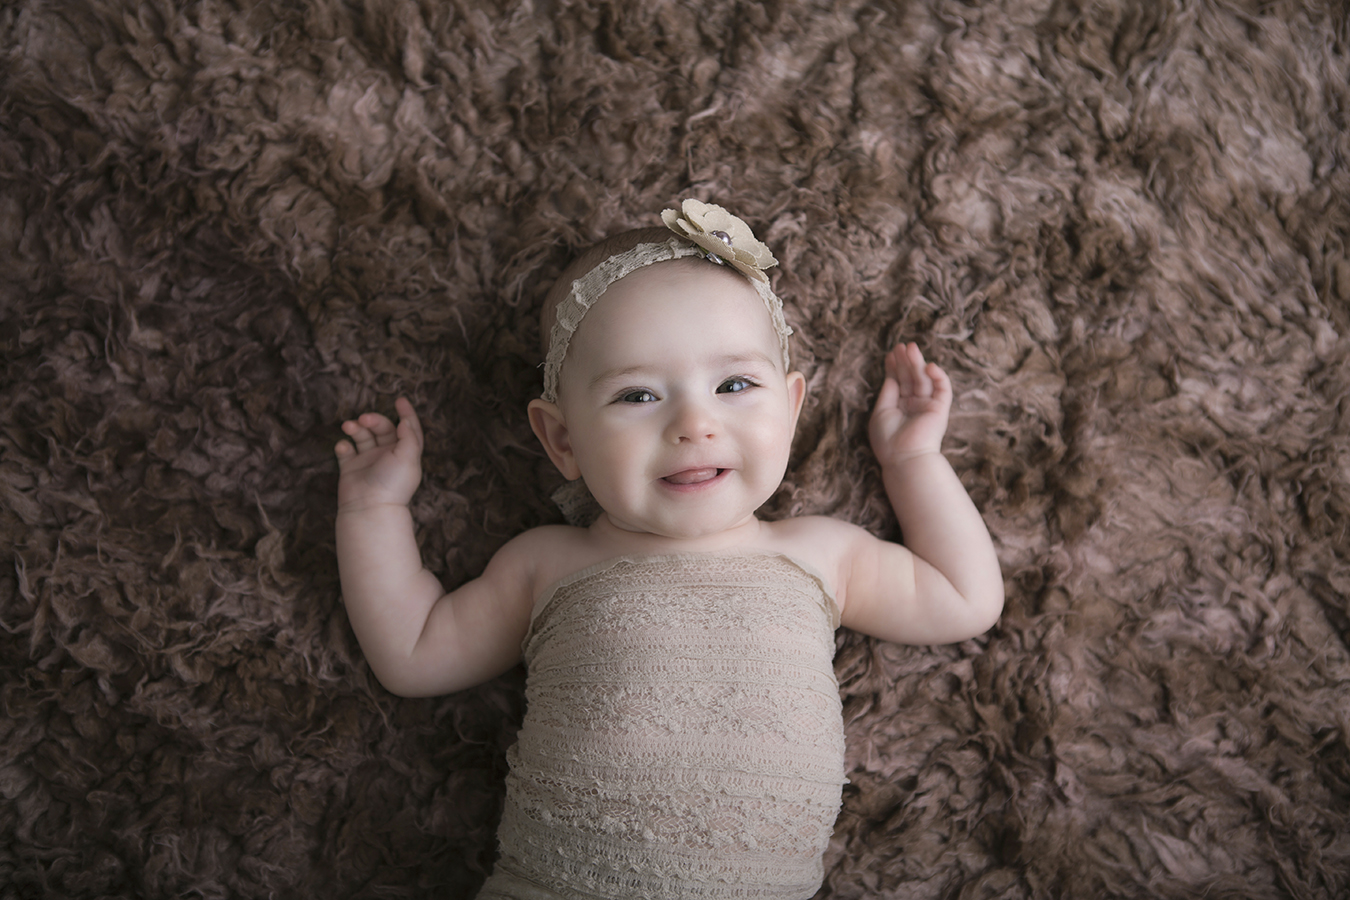 Smiling baby Portraits